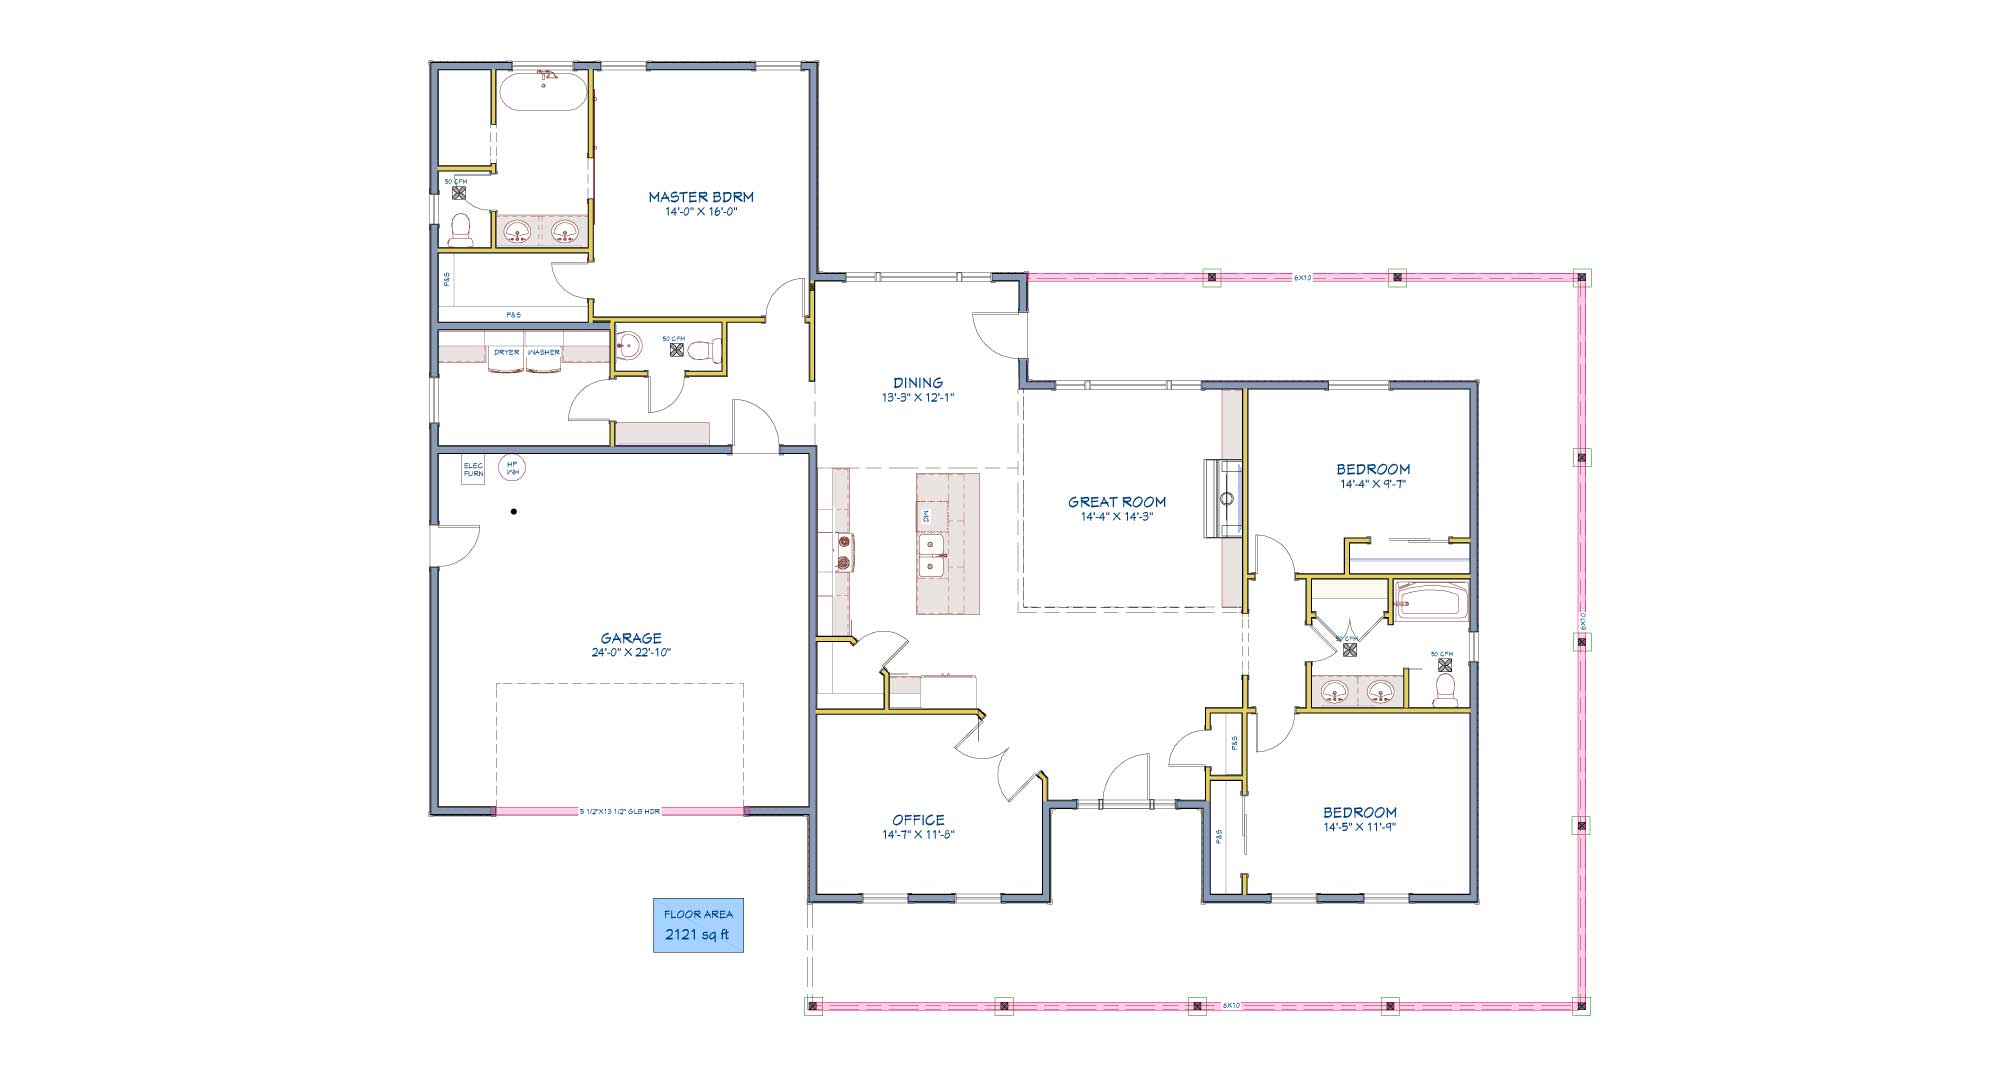 Floor plan for a traditional custom home by Design NW